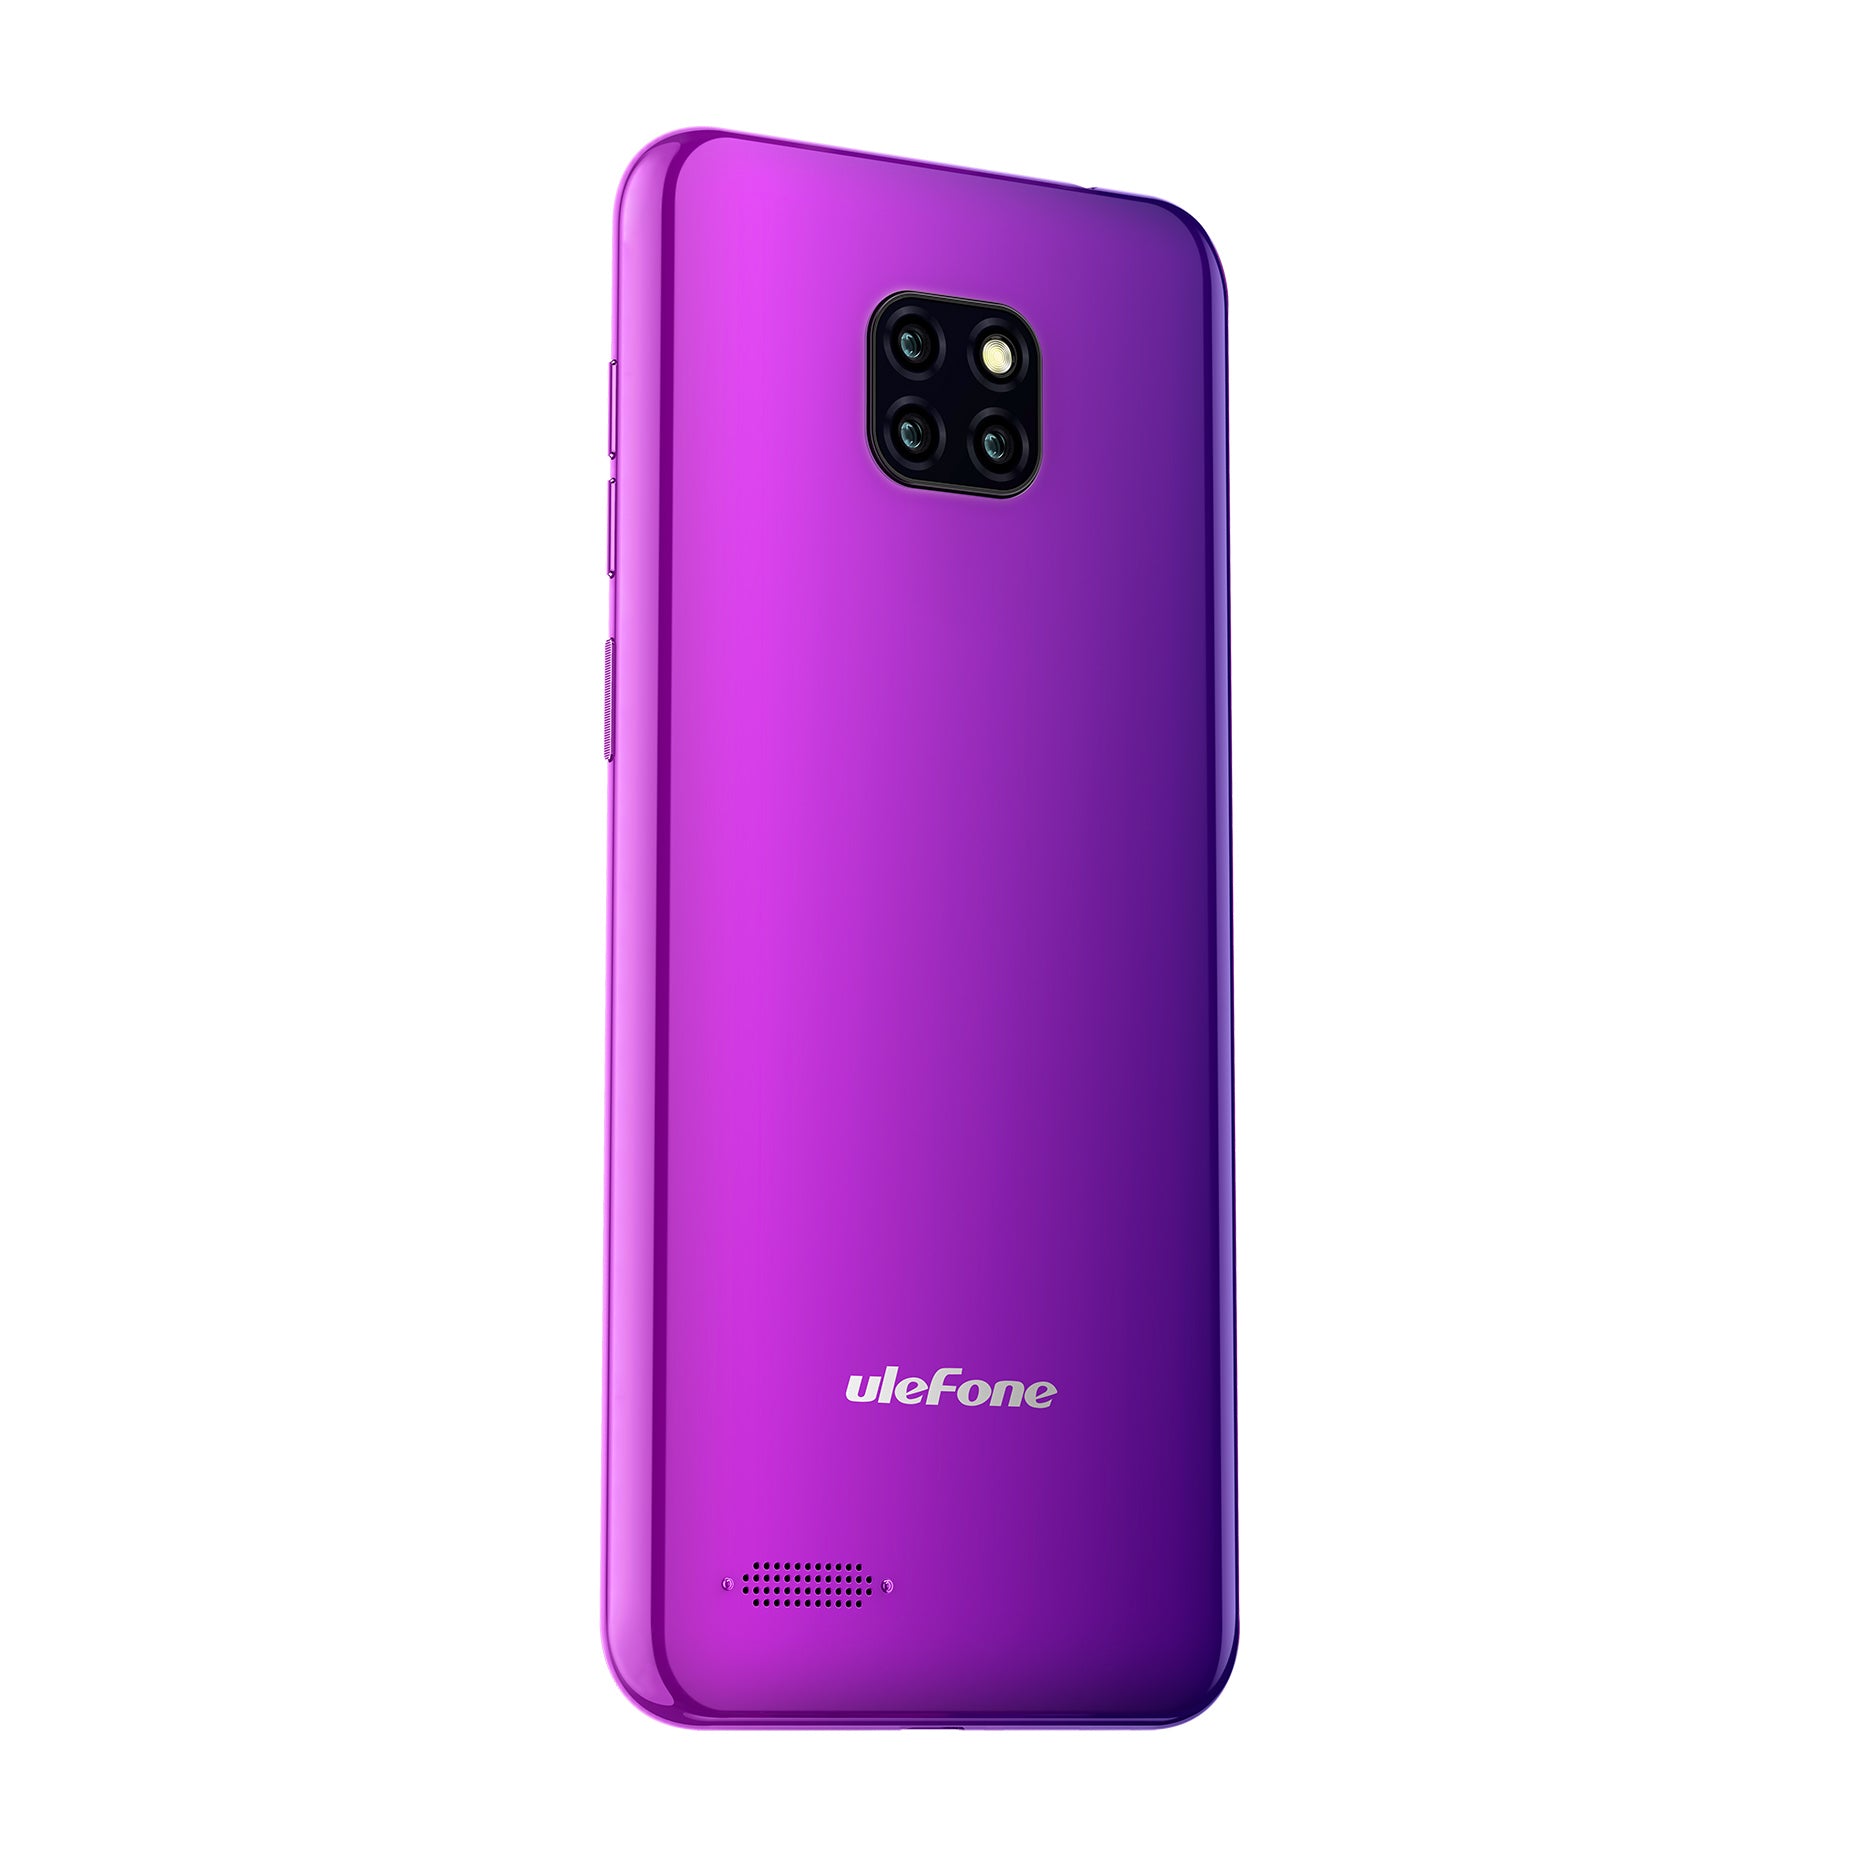 Ulefone Note 7 3G Phablet 6.1 Inch Android 8.1 (Go Edition) MT6580A Quad-core 1.3GHz 1GB RAM 16GB ROM Smartphone Purple